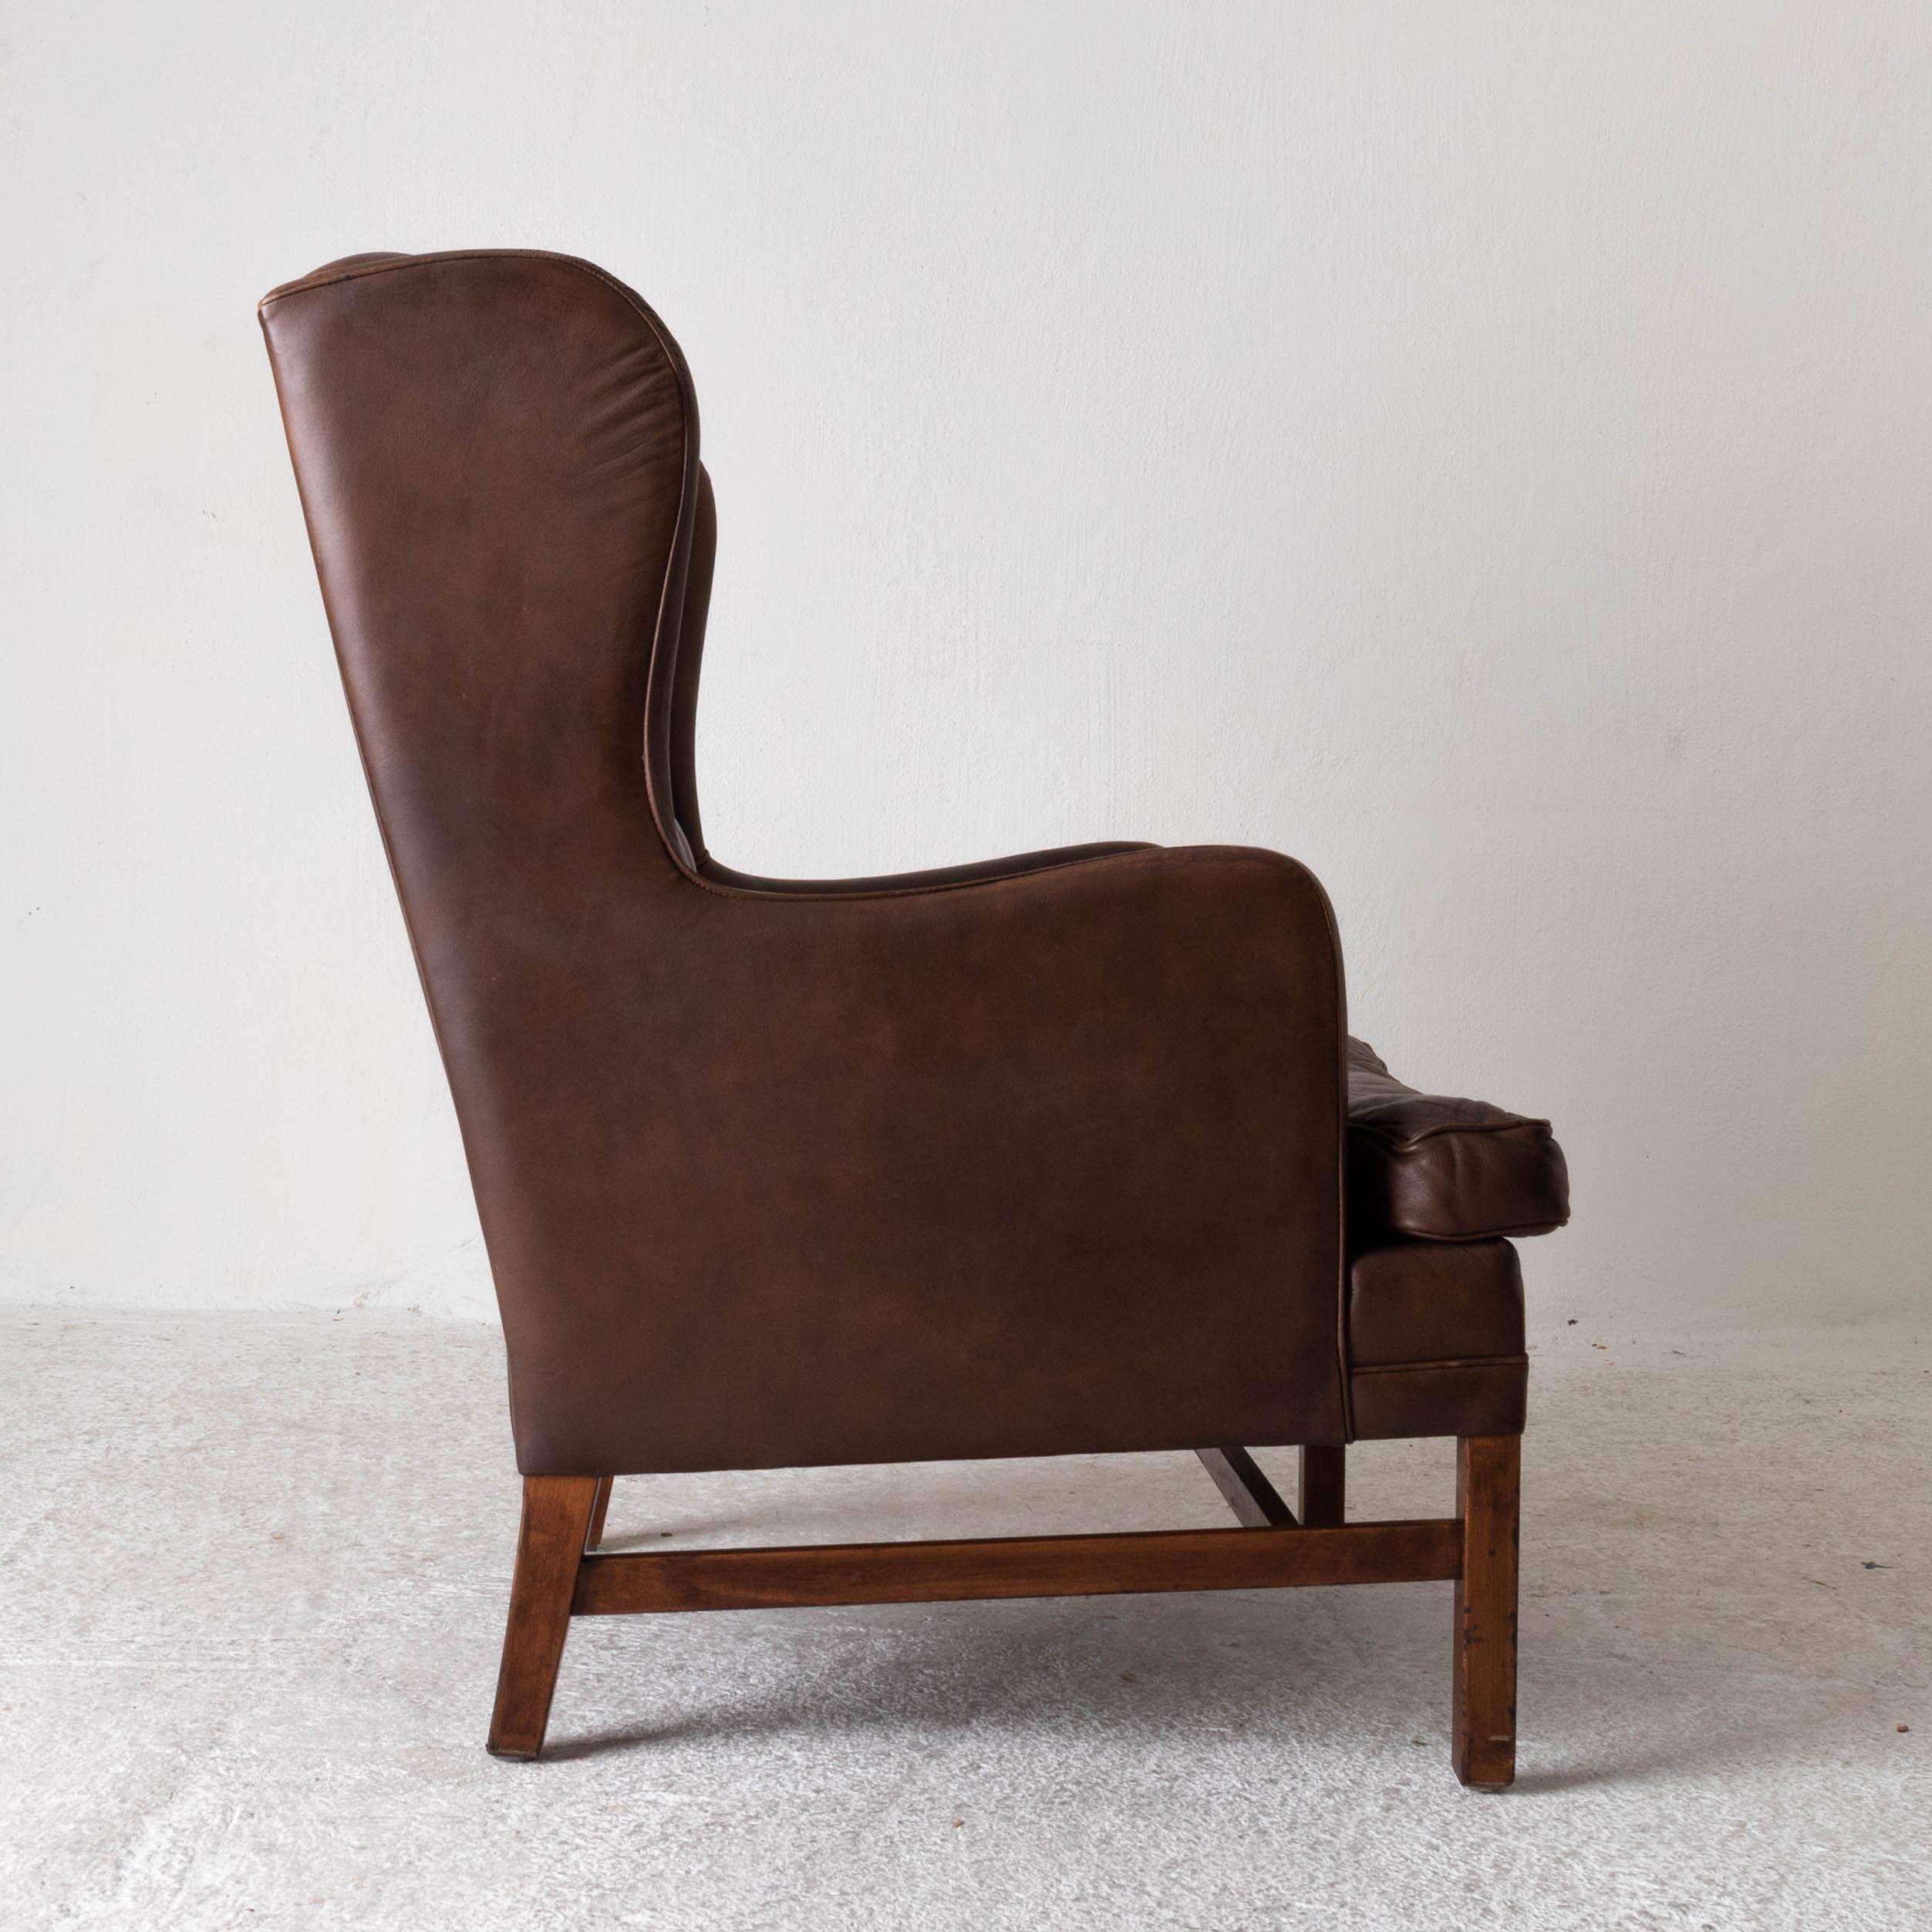 Wood Chair Wingback Swedish 20th Century Brown Tufted, Sweden For Sale